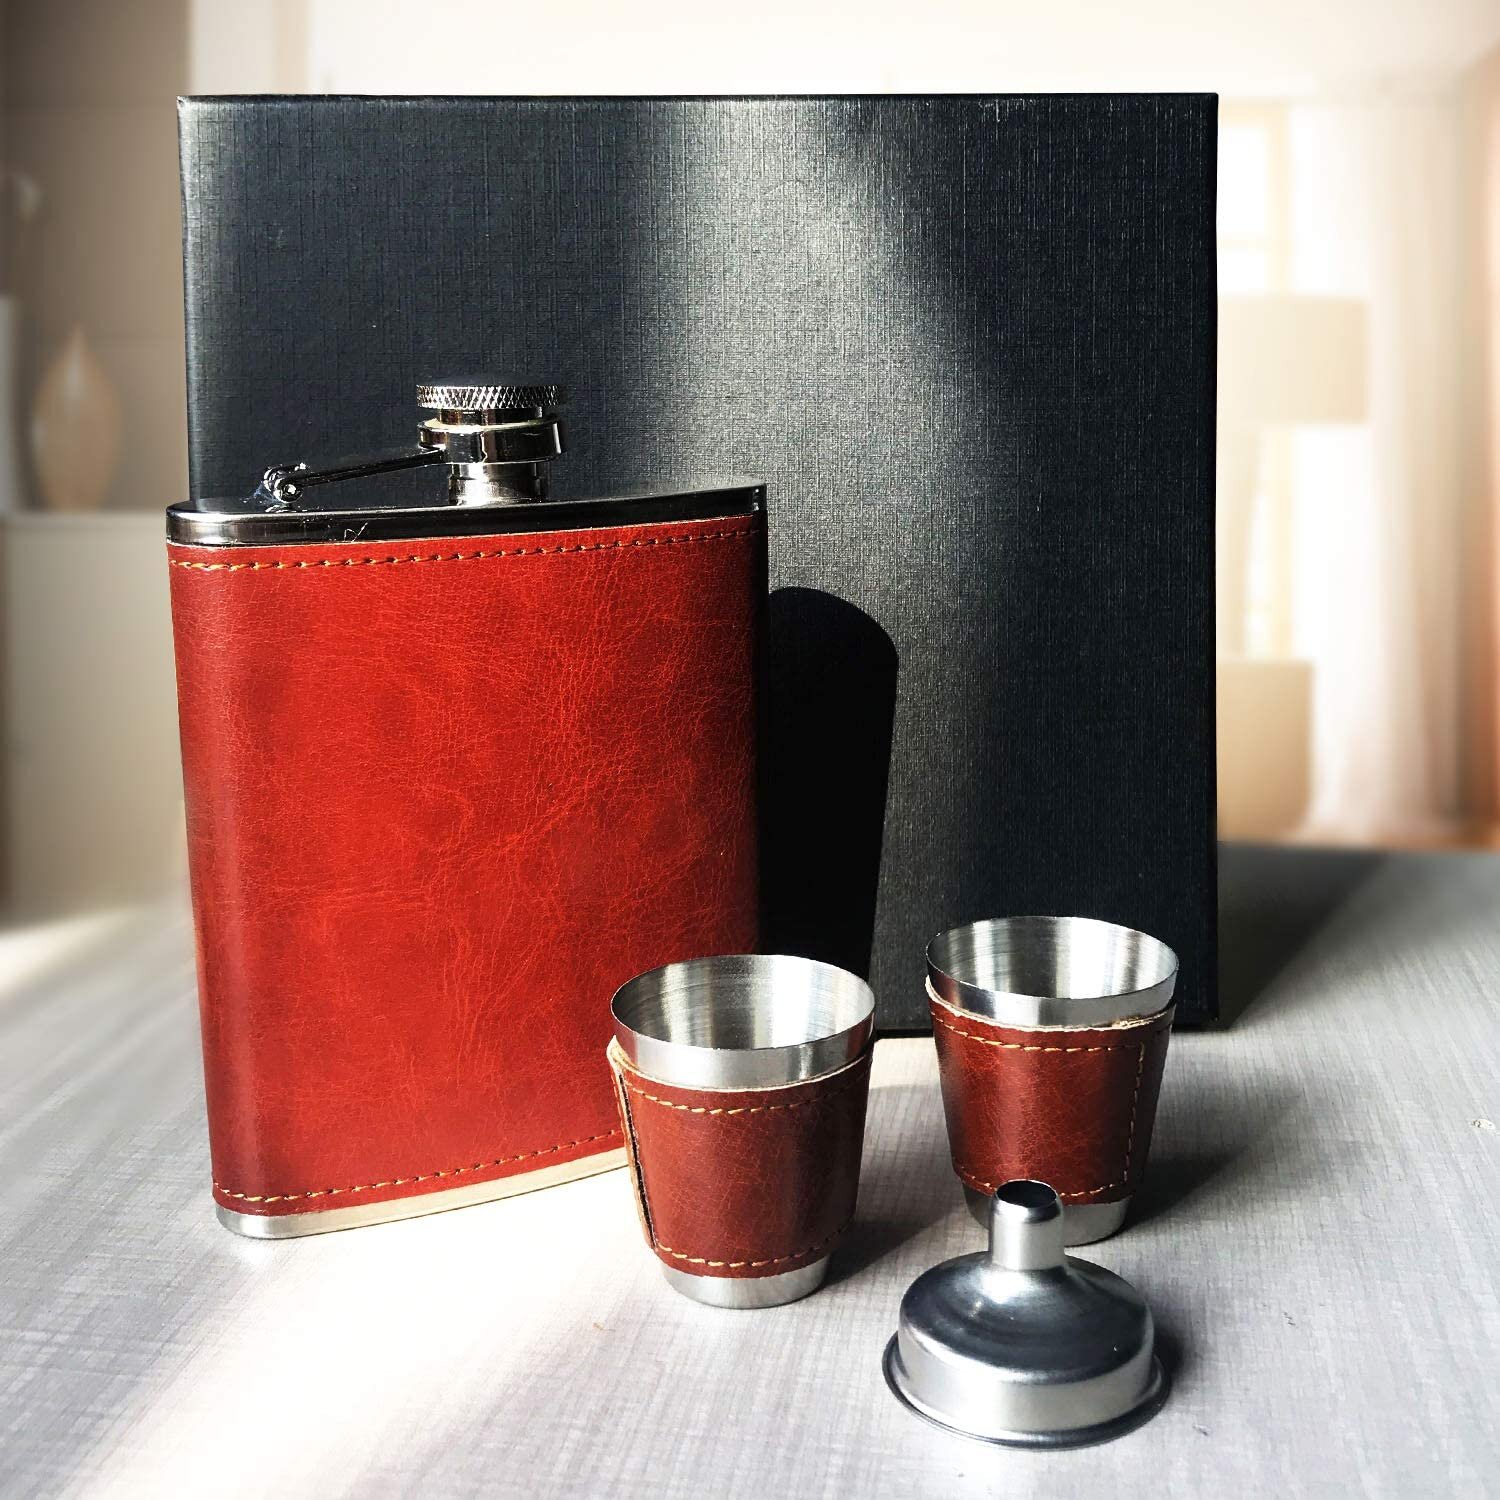 Stainless Steel Cup Mug Hip Flask with Wrap for Camping Drinking Travel Use Tool